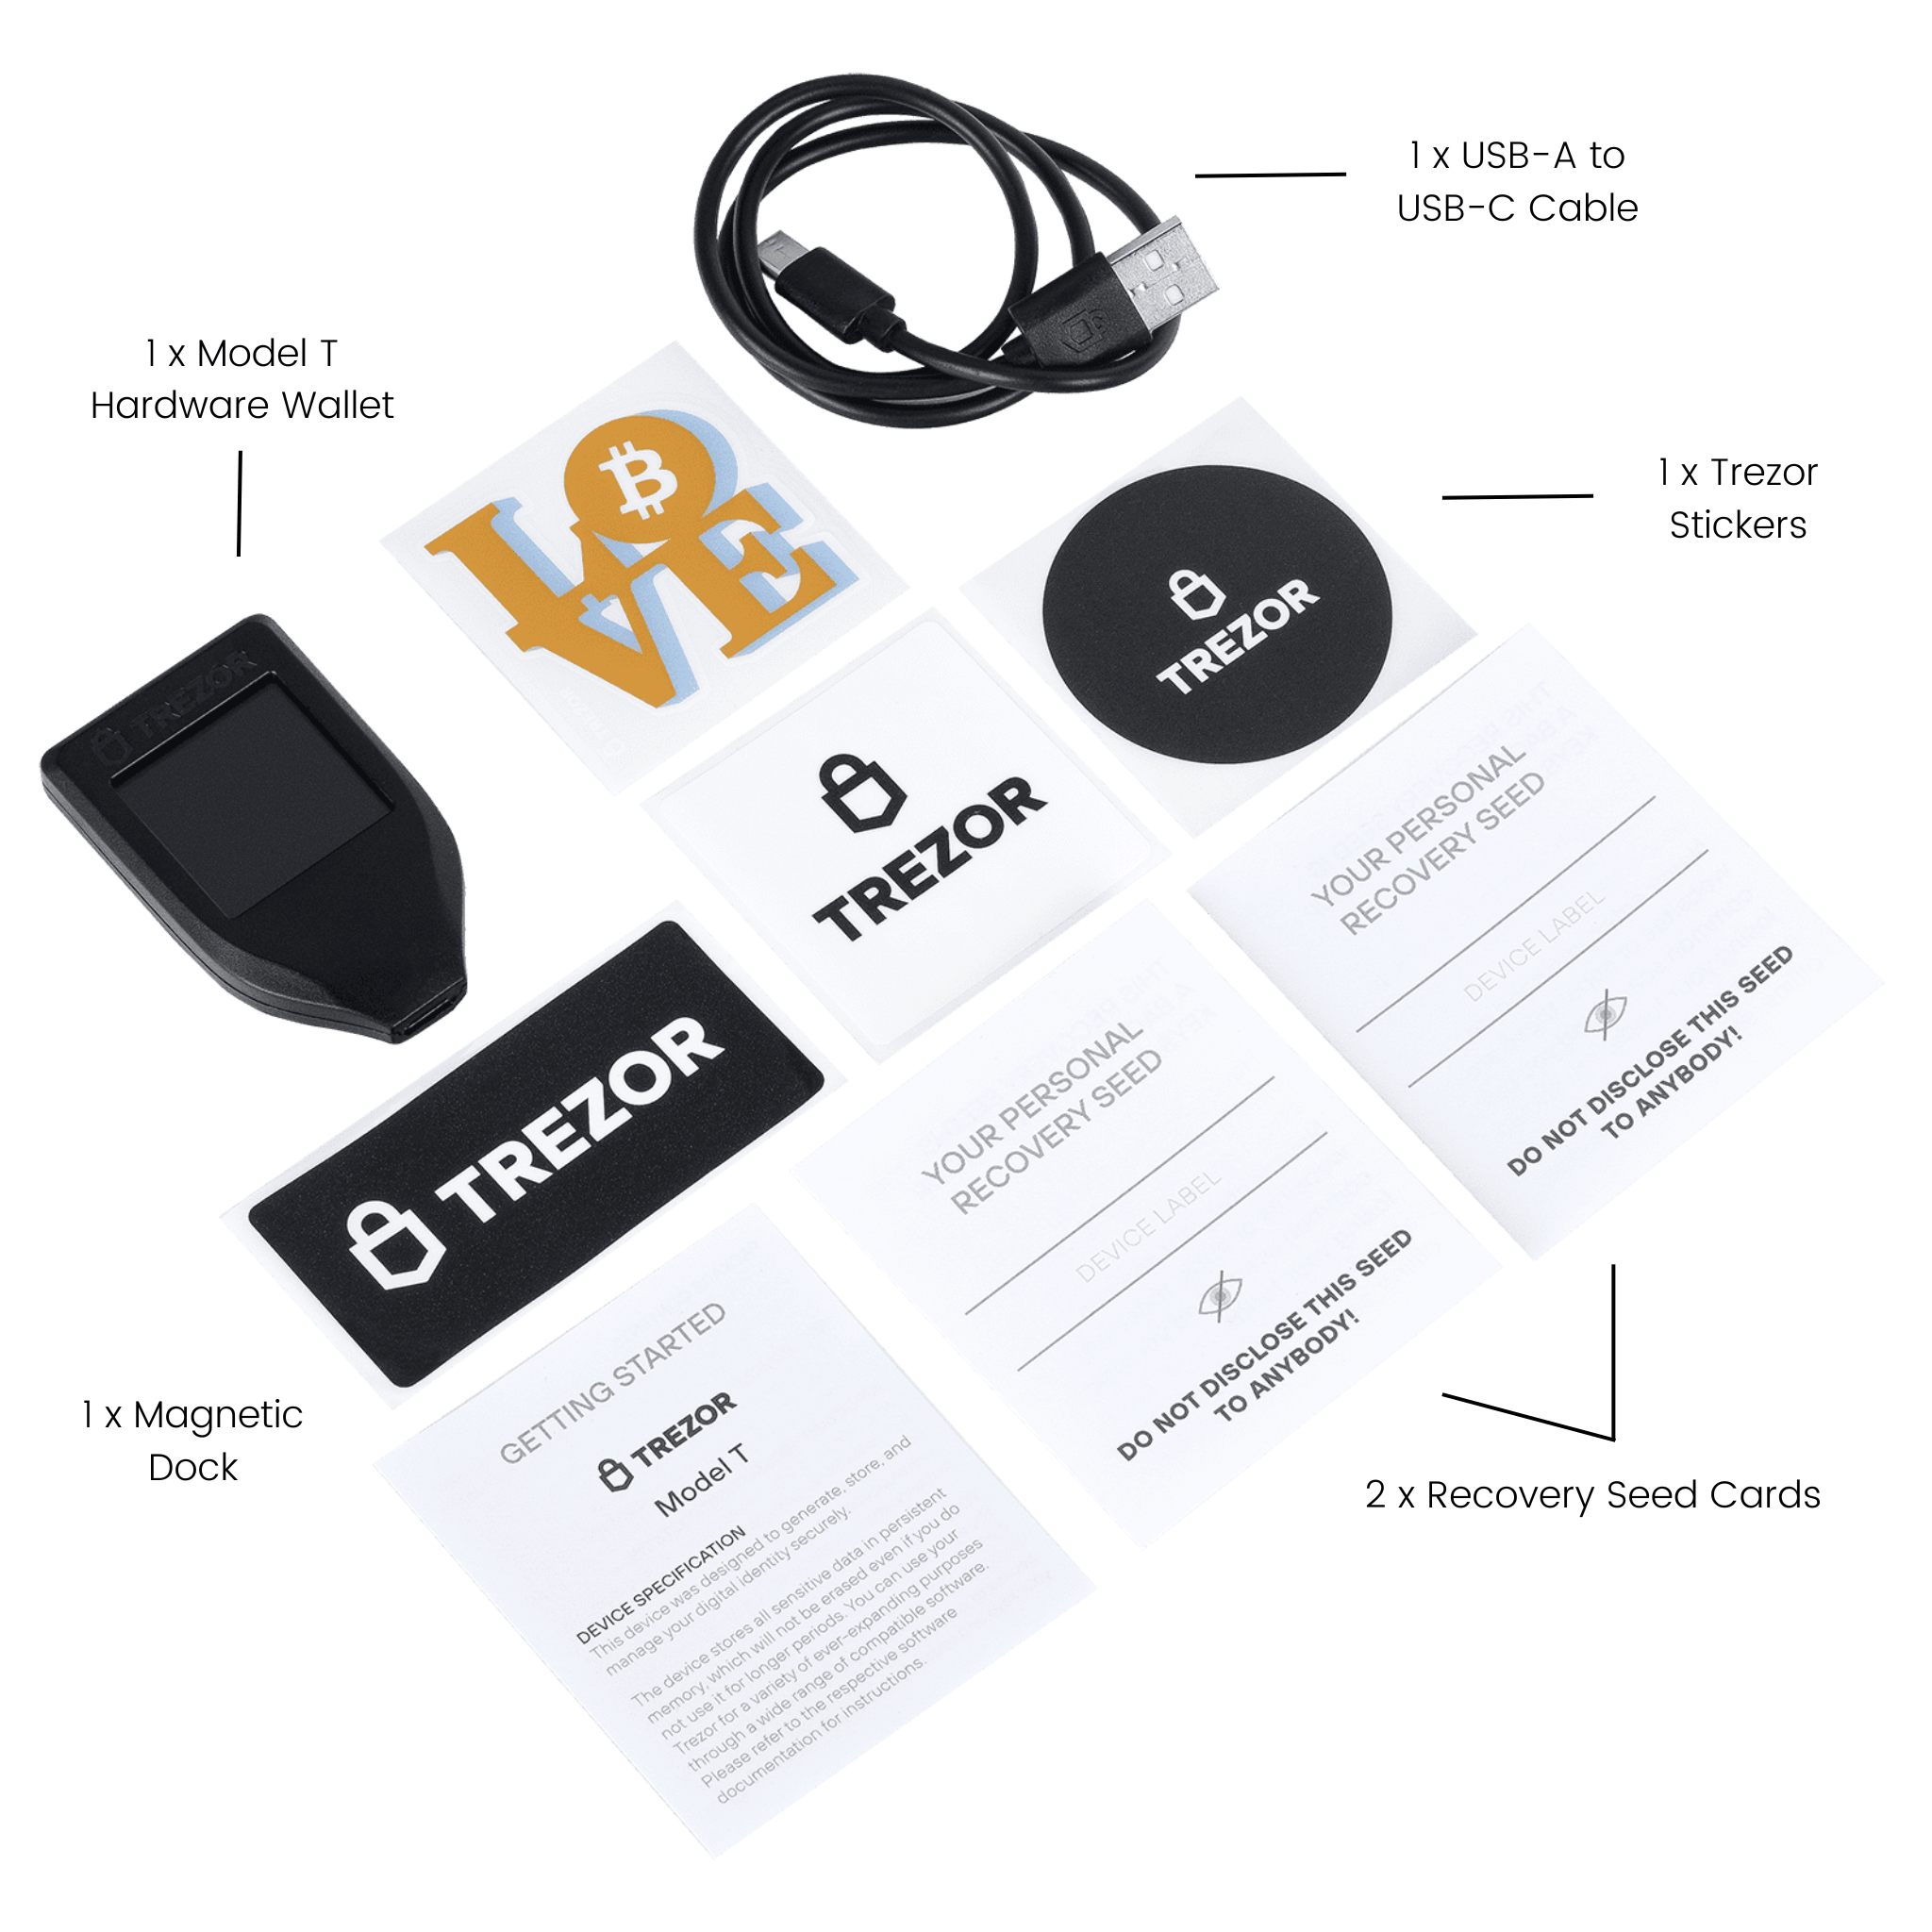 Trezor Model T Cryptocurrency Hardware Wallet Package Contents